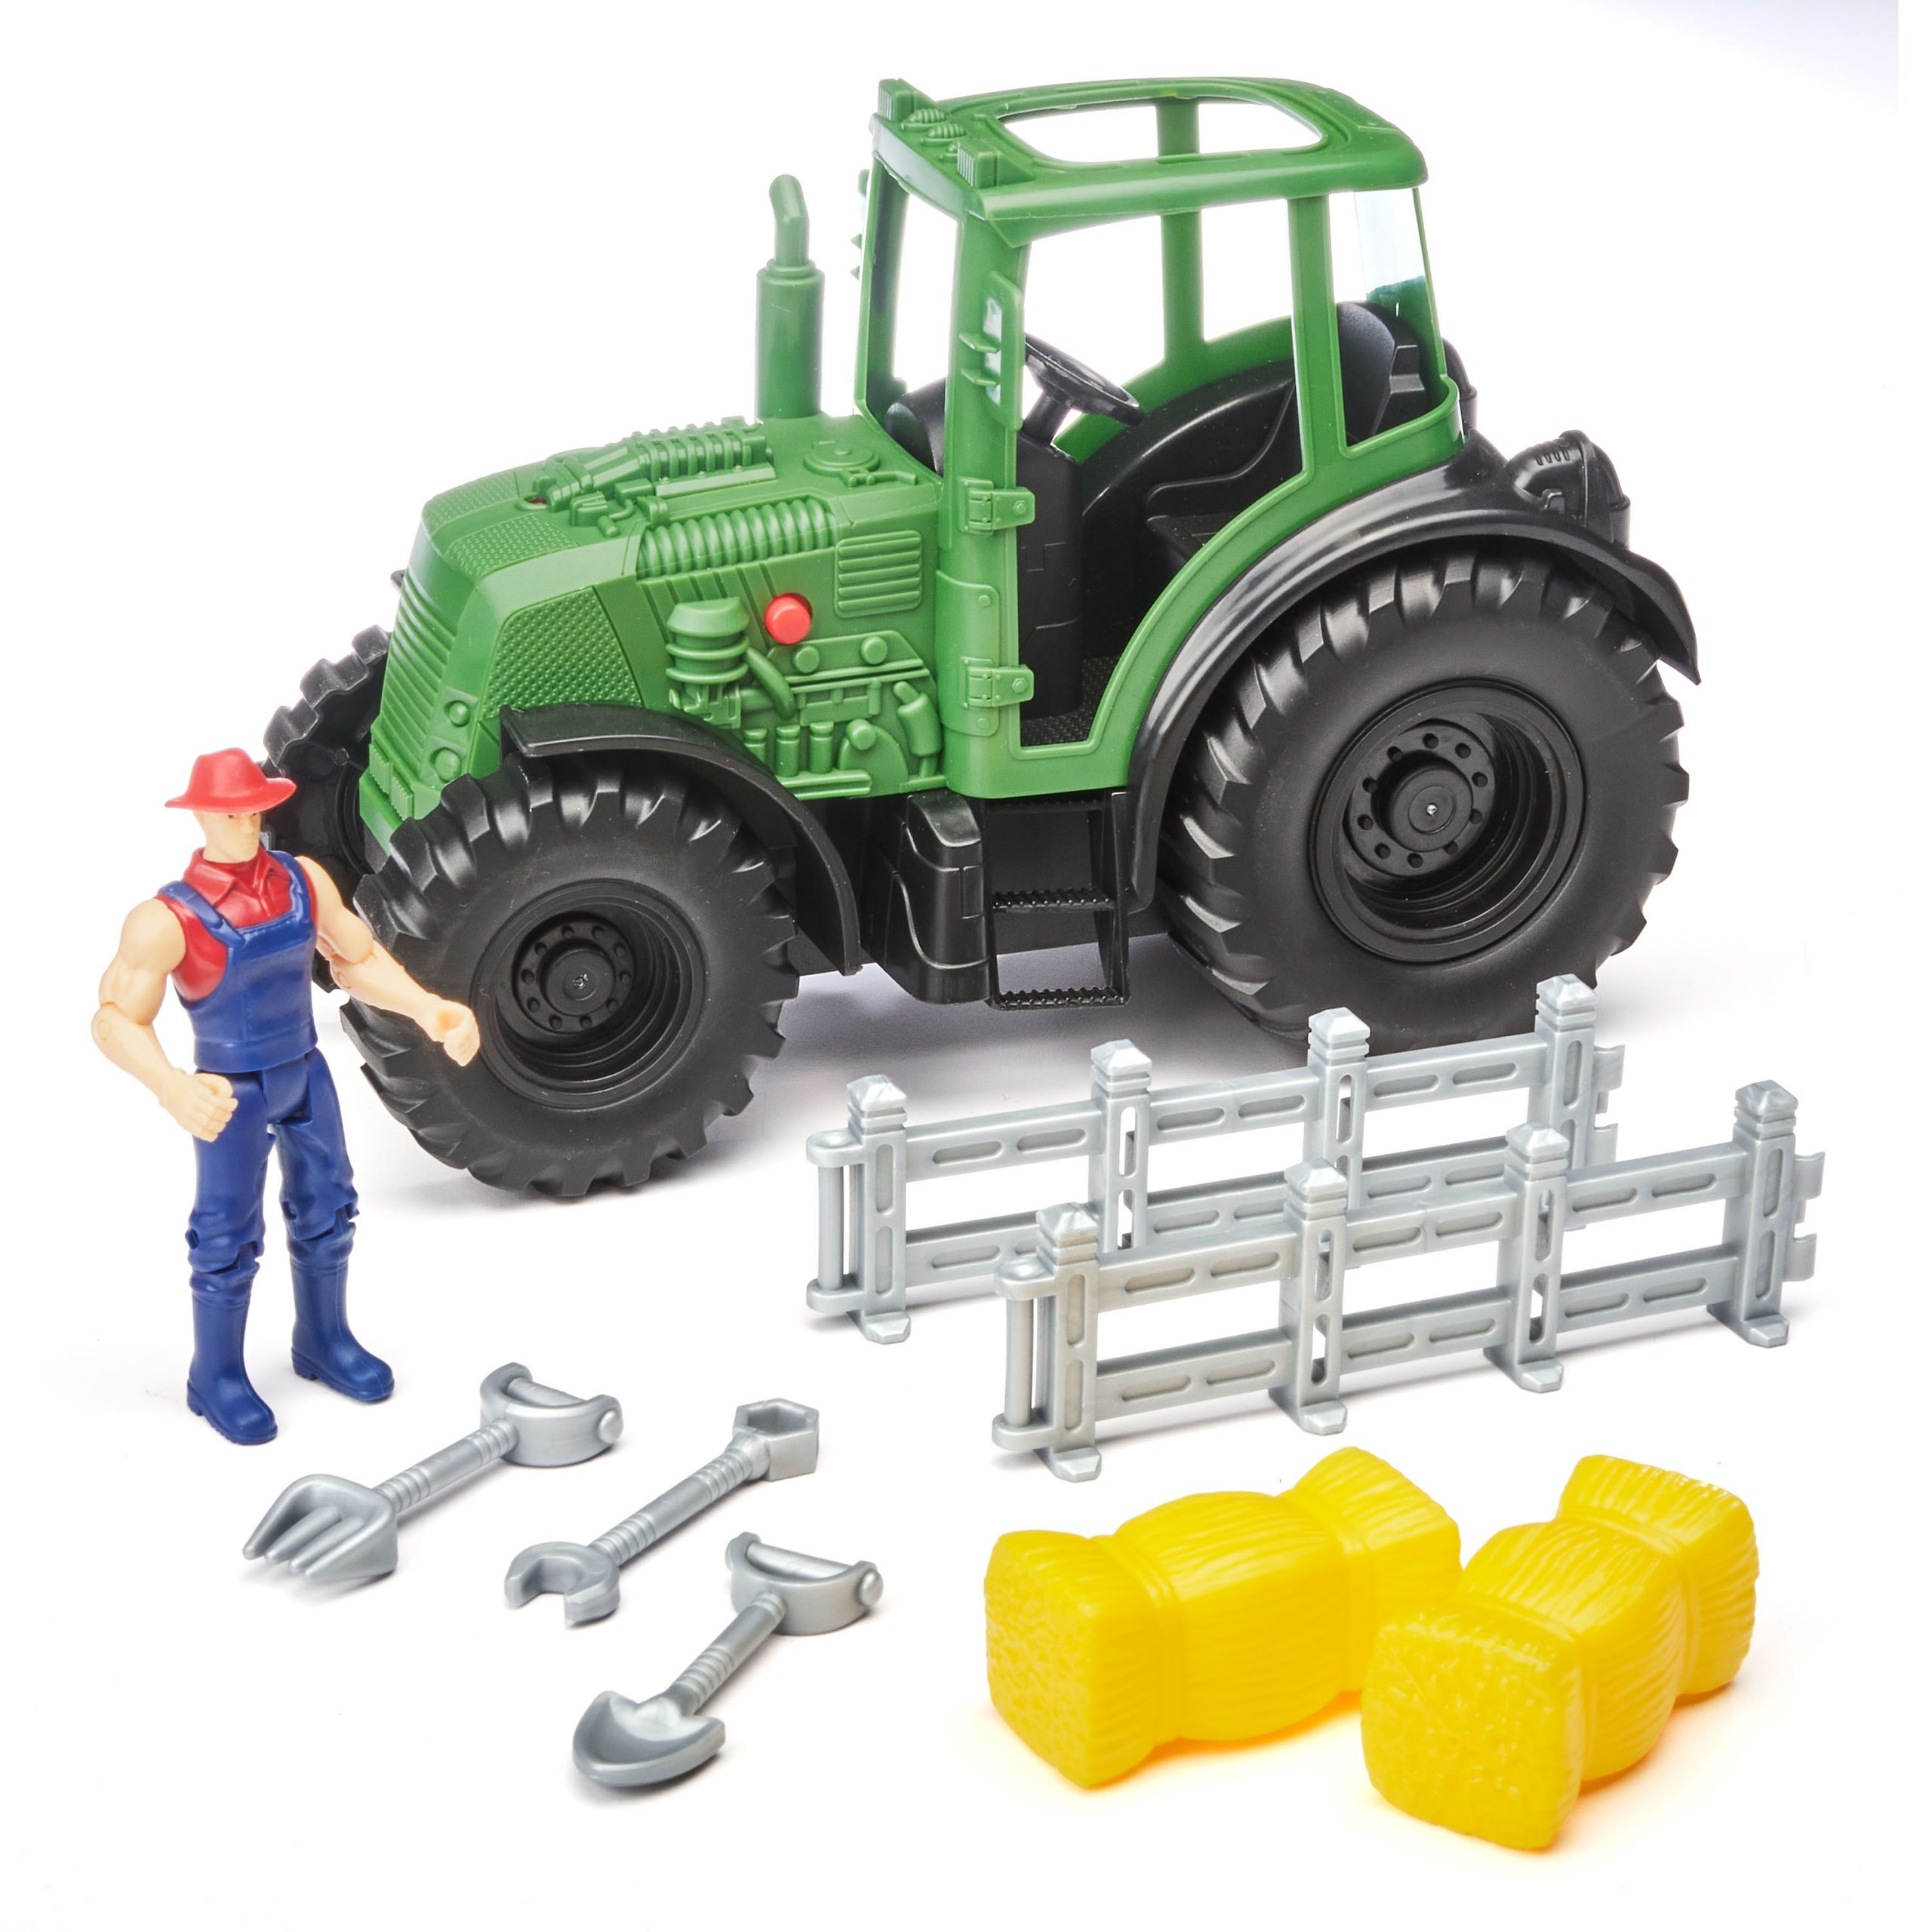 Kid Connection Farm Tractor Play Set, 9 Pieces